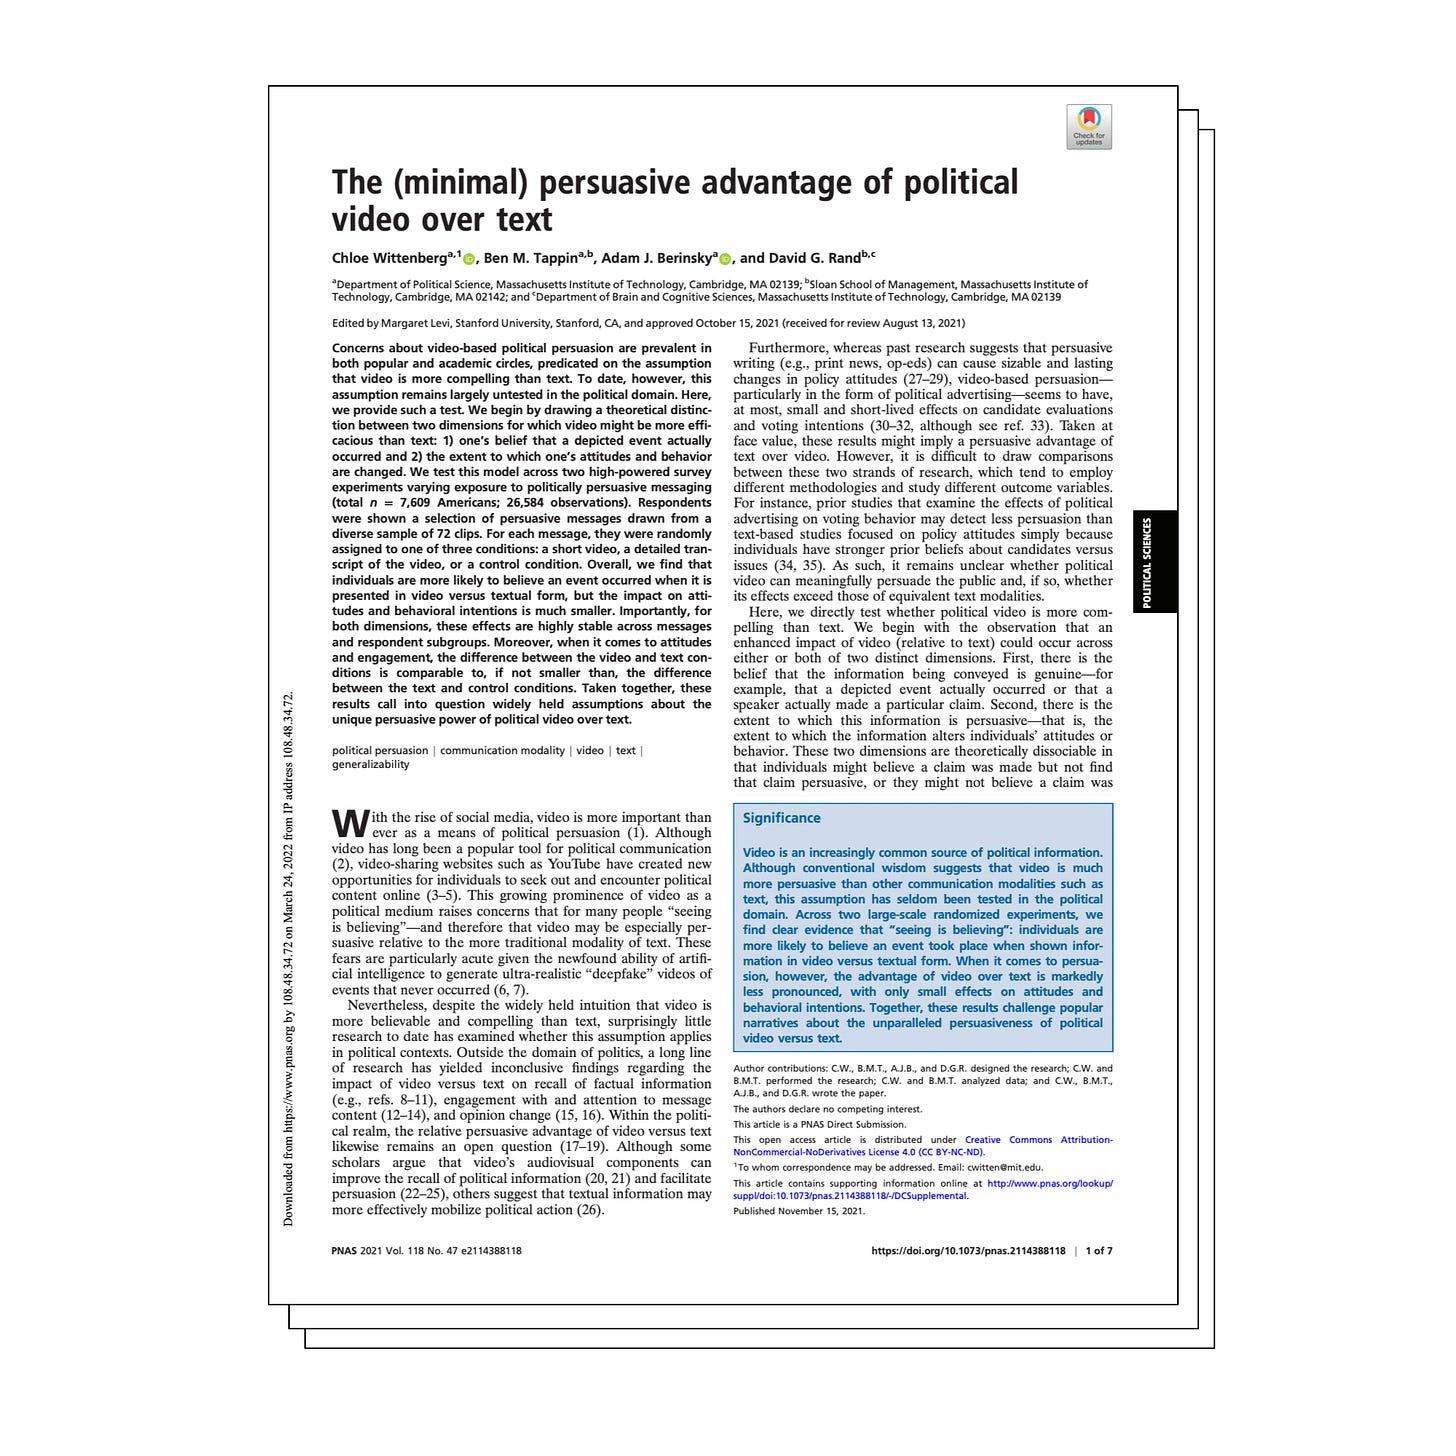 An image of the front page of the research paper